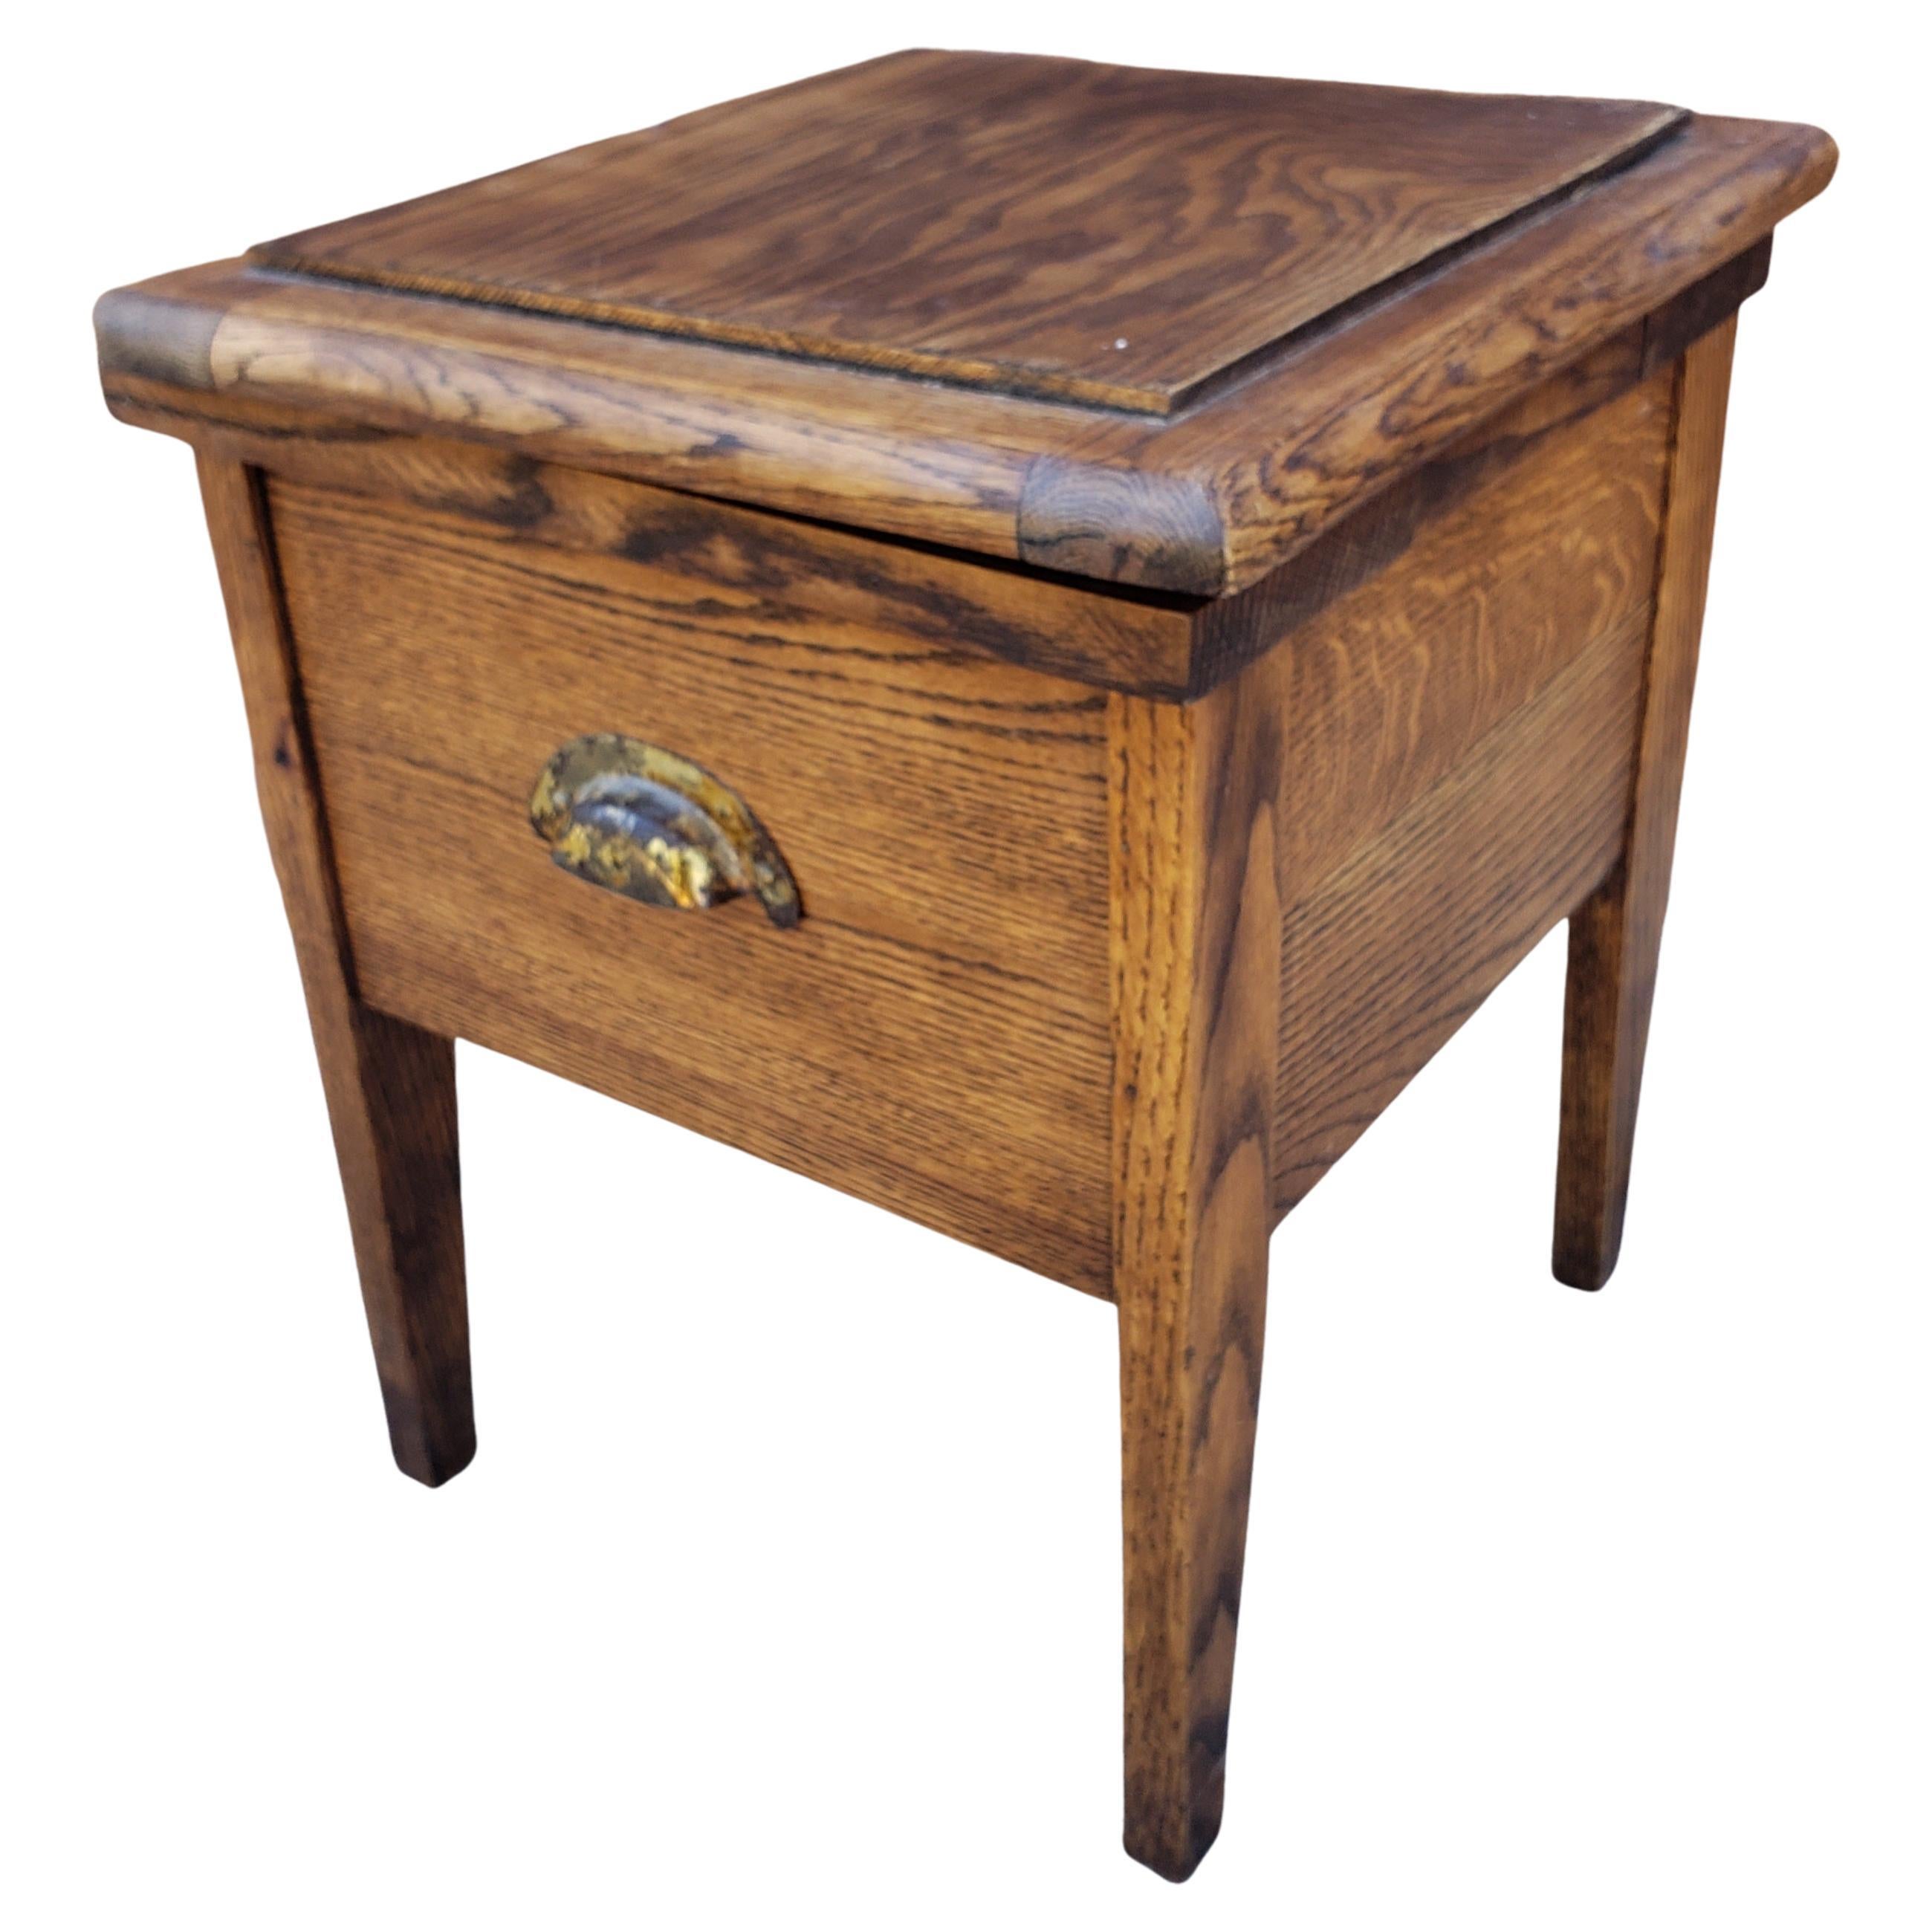 Versatile use Vintage Mission Oak Low Stool, Bedroom Commode or Trash Box whichever way you want to use it. 
Very good vintage condition.
Measures 14.75